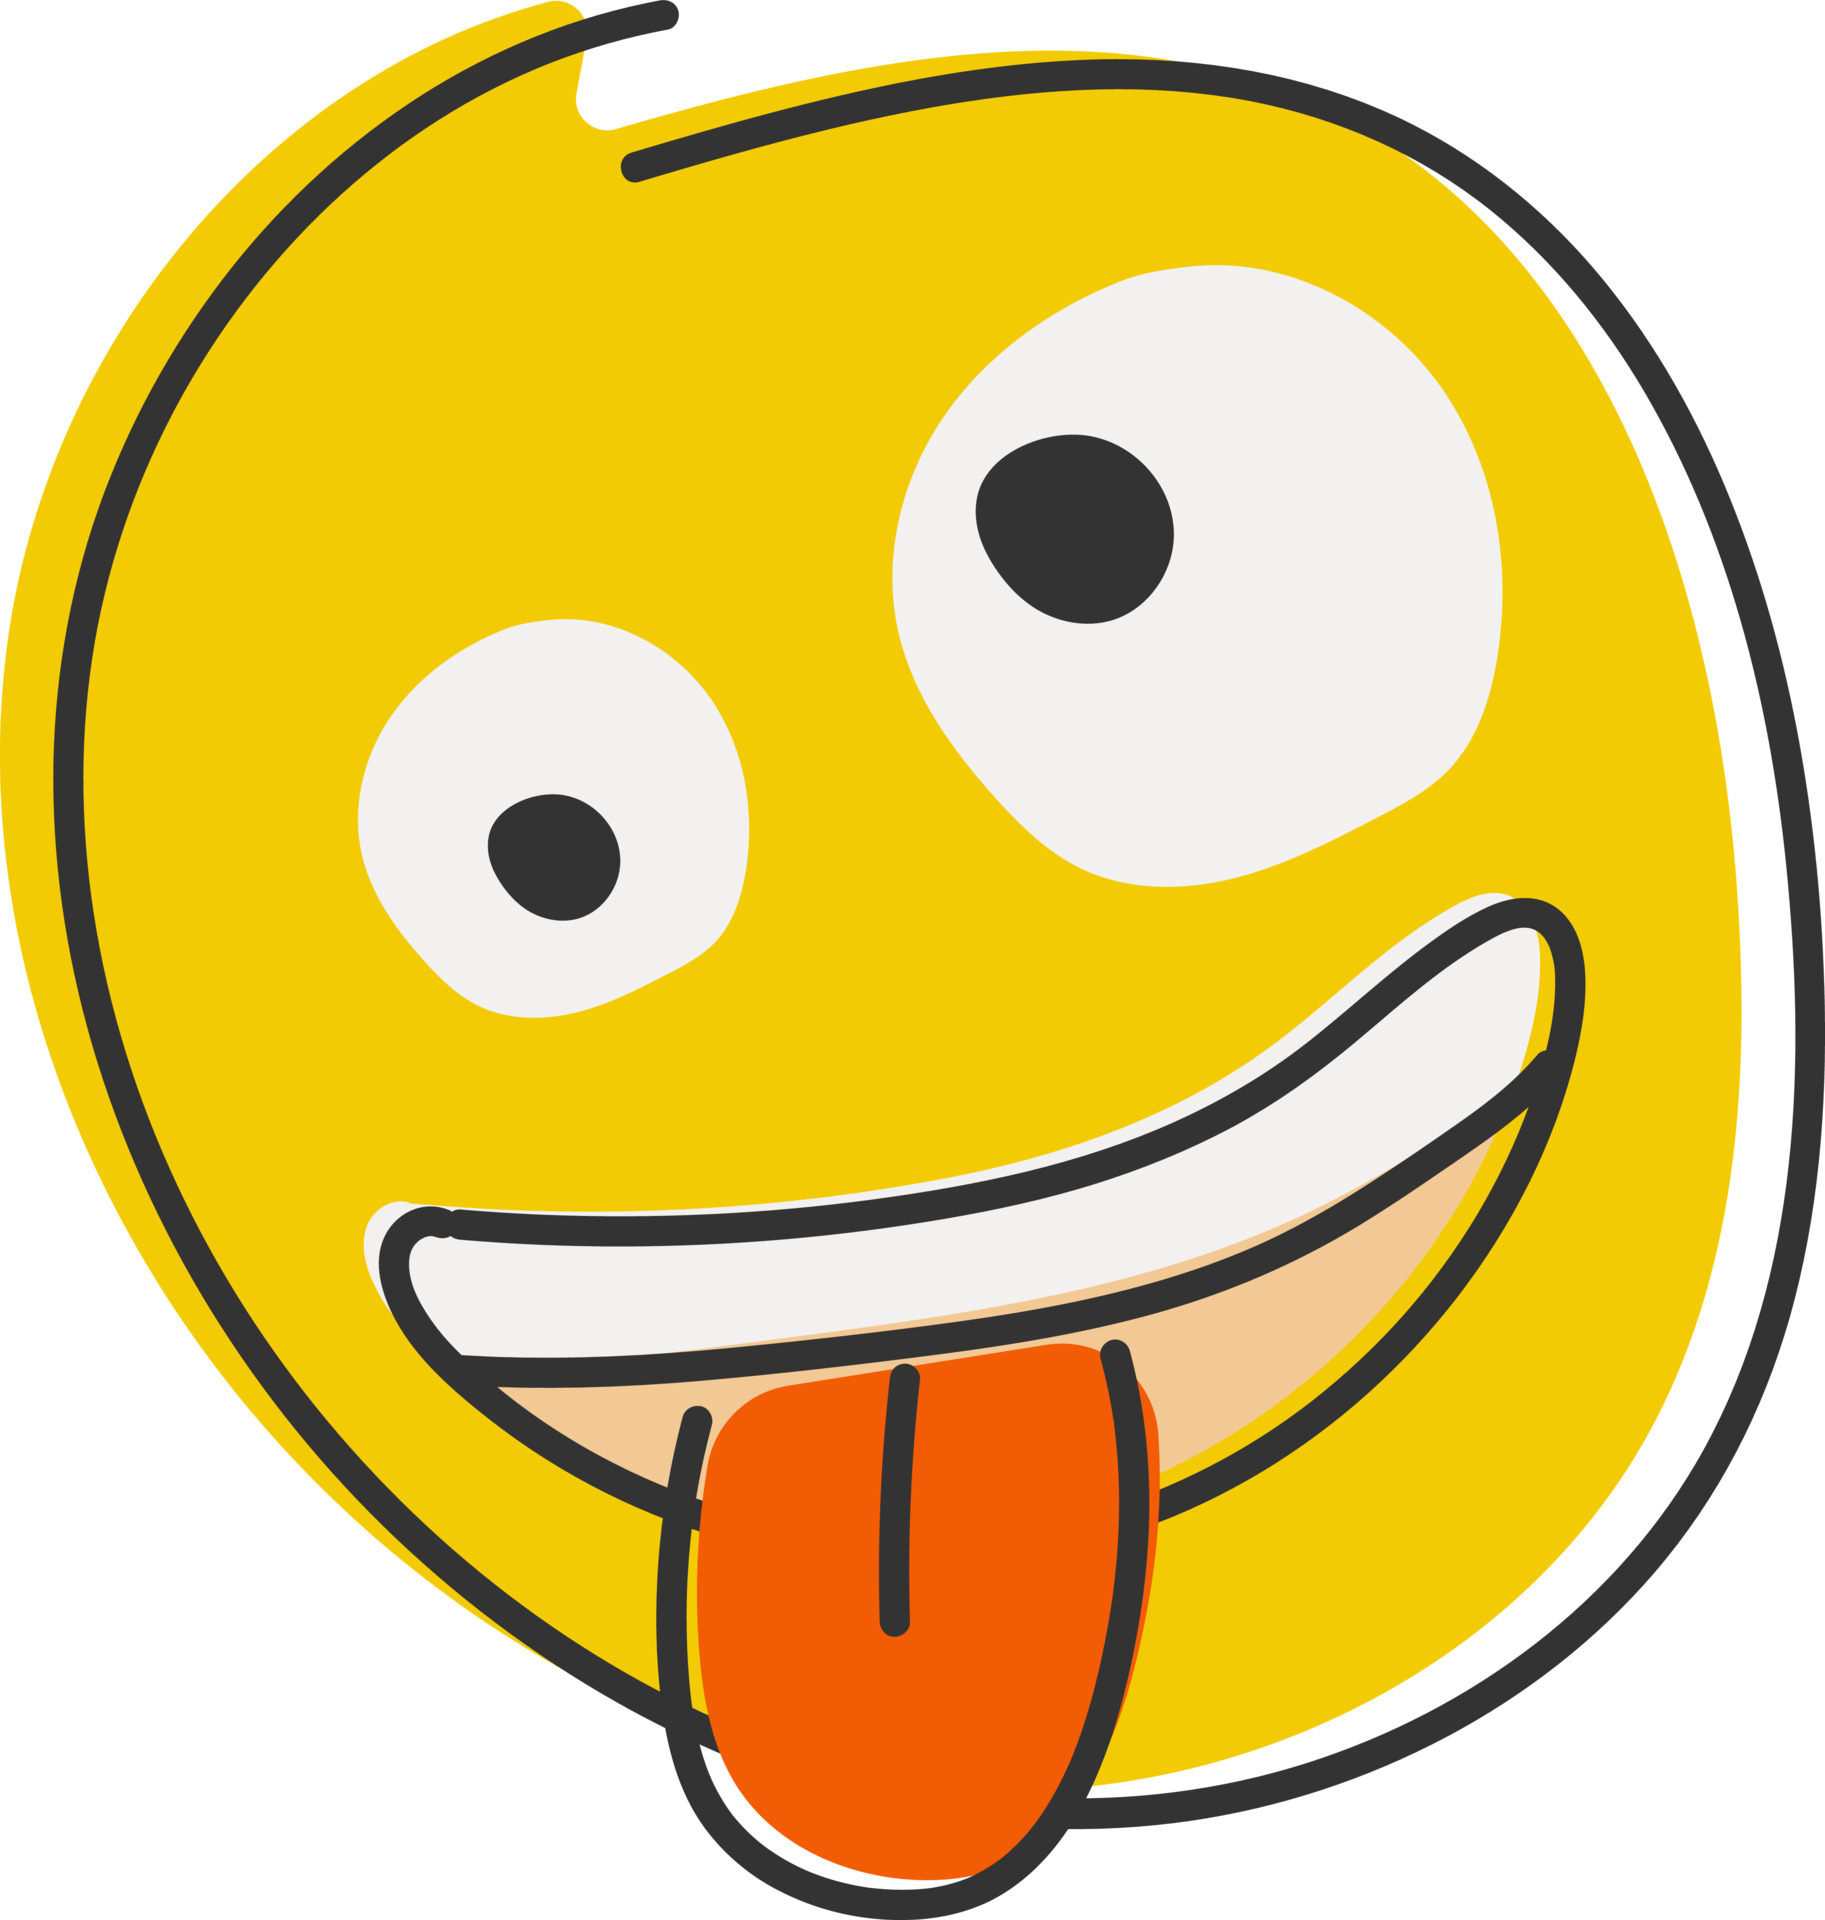 https://static.vecteezy.com/system/resources/previews/022/461/851/original/zany-emoji-goofy-emoticon-with-crazy-eyes-and-tongue-out-vector.jpg